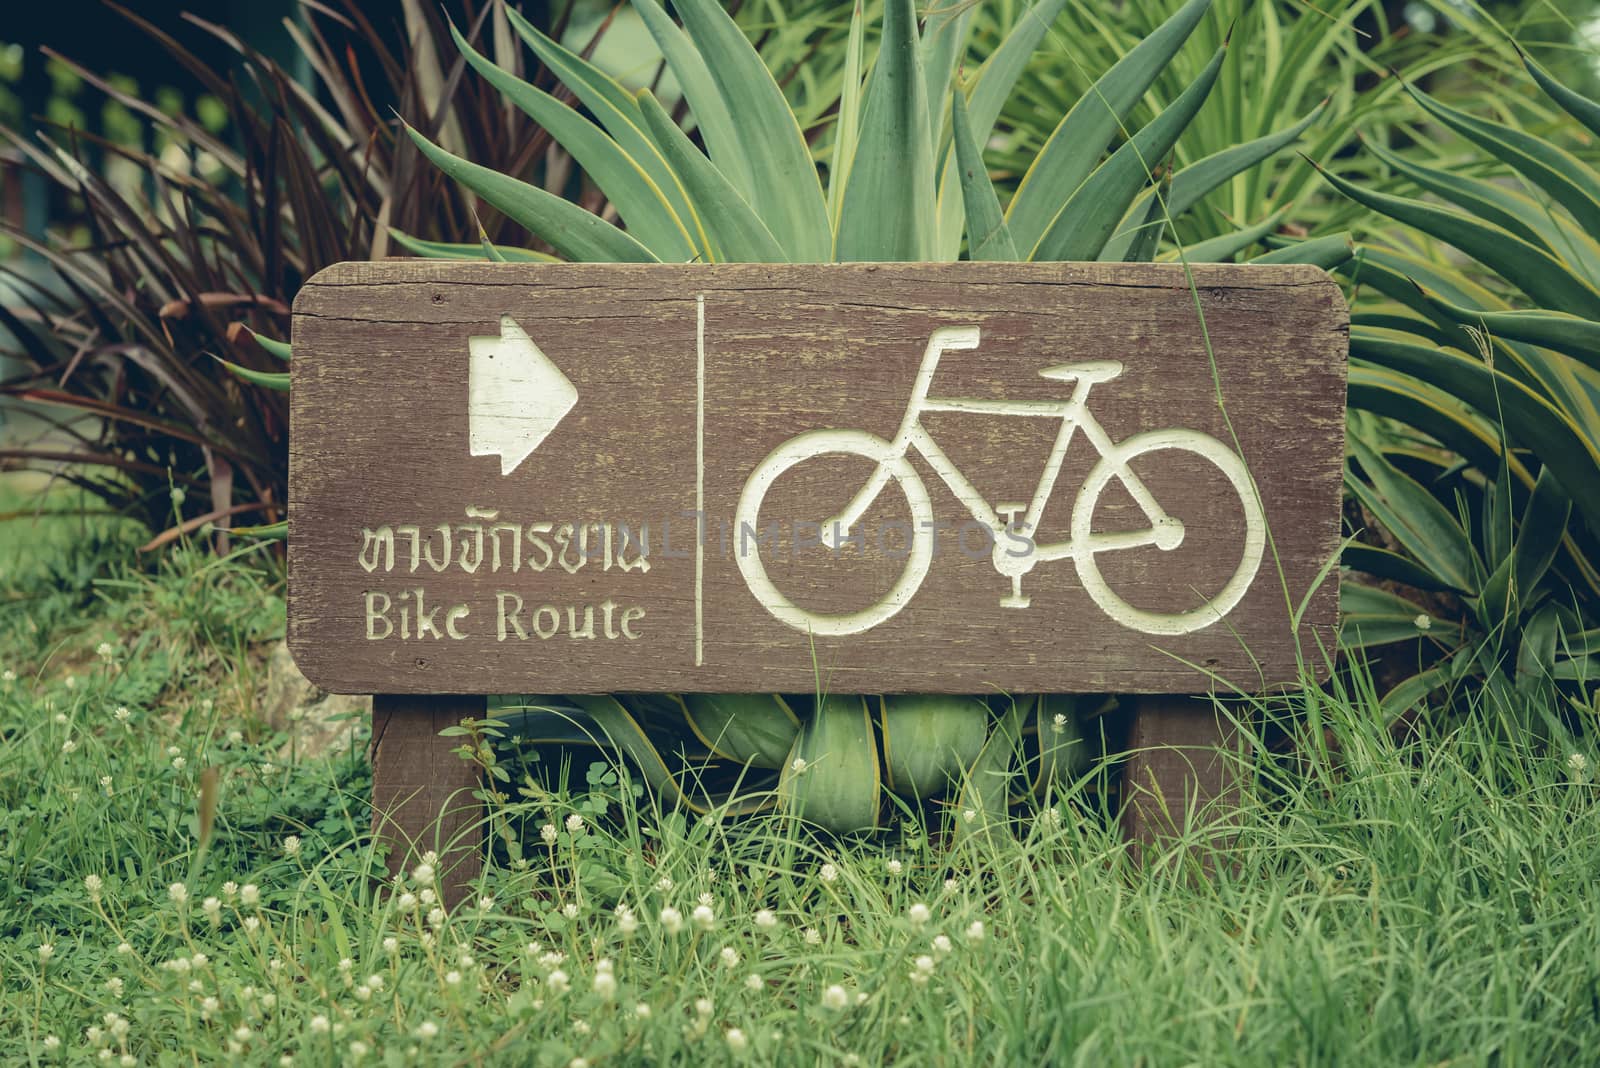 Bike route or bike lane or icon and movement of cyclist in the park.Bangkok, Thailand